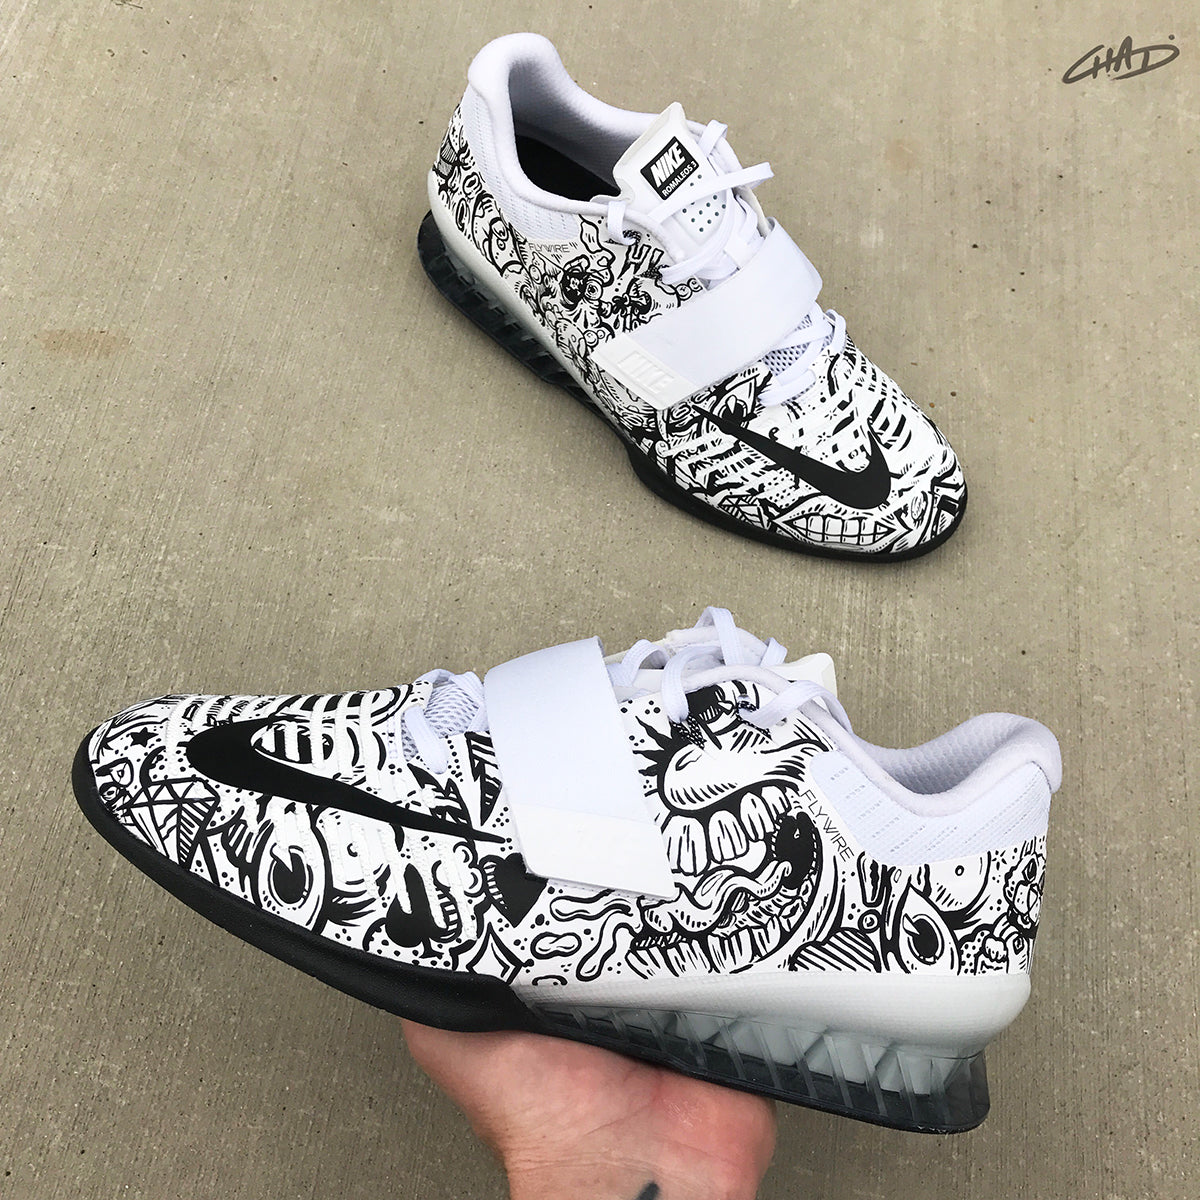 Doodles Hand painted Nike Romaleos 3 